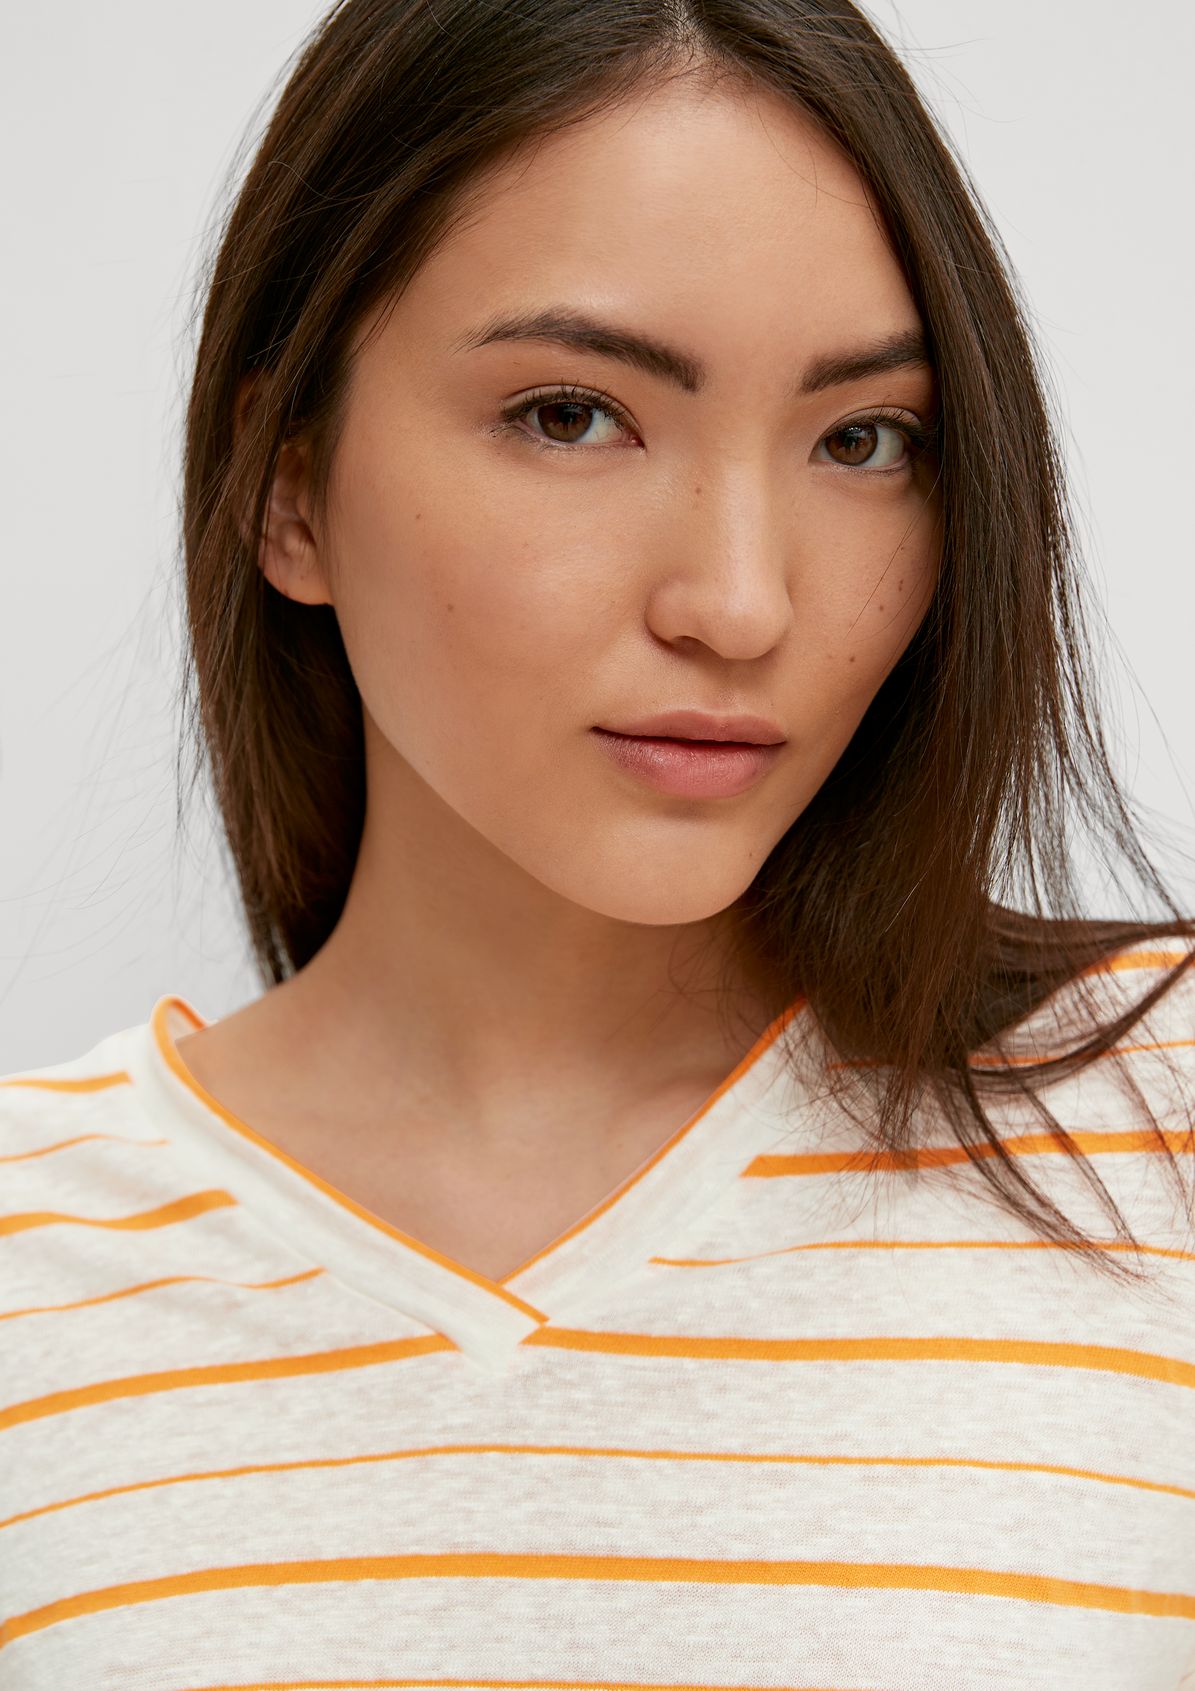 T-shirt with a stripe pattern from comma